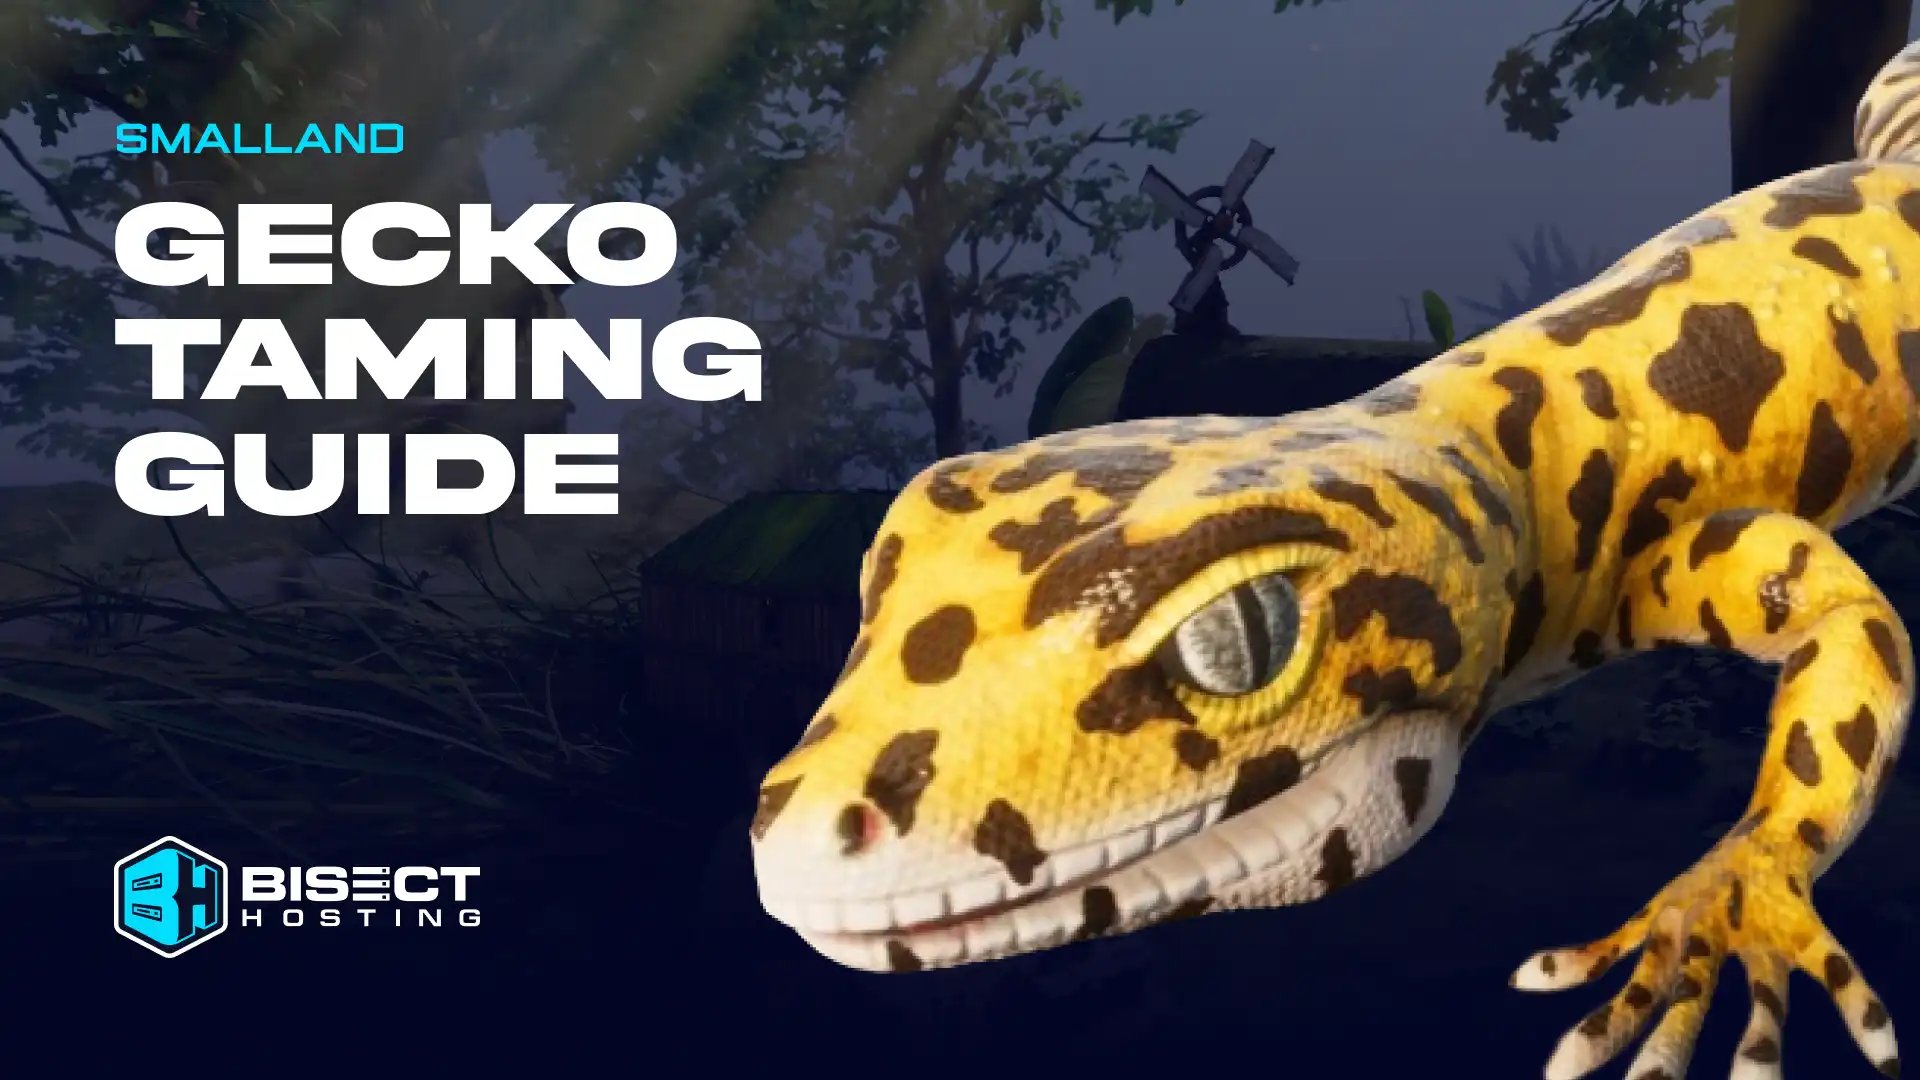 How to Tame a Gecko in Smalland